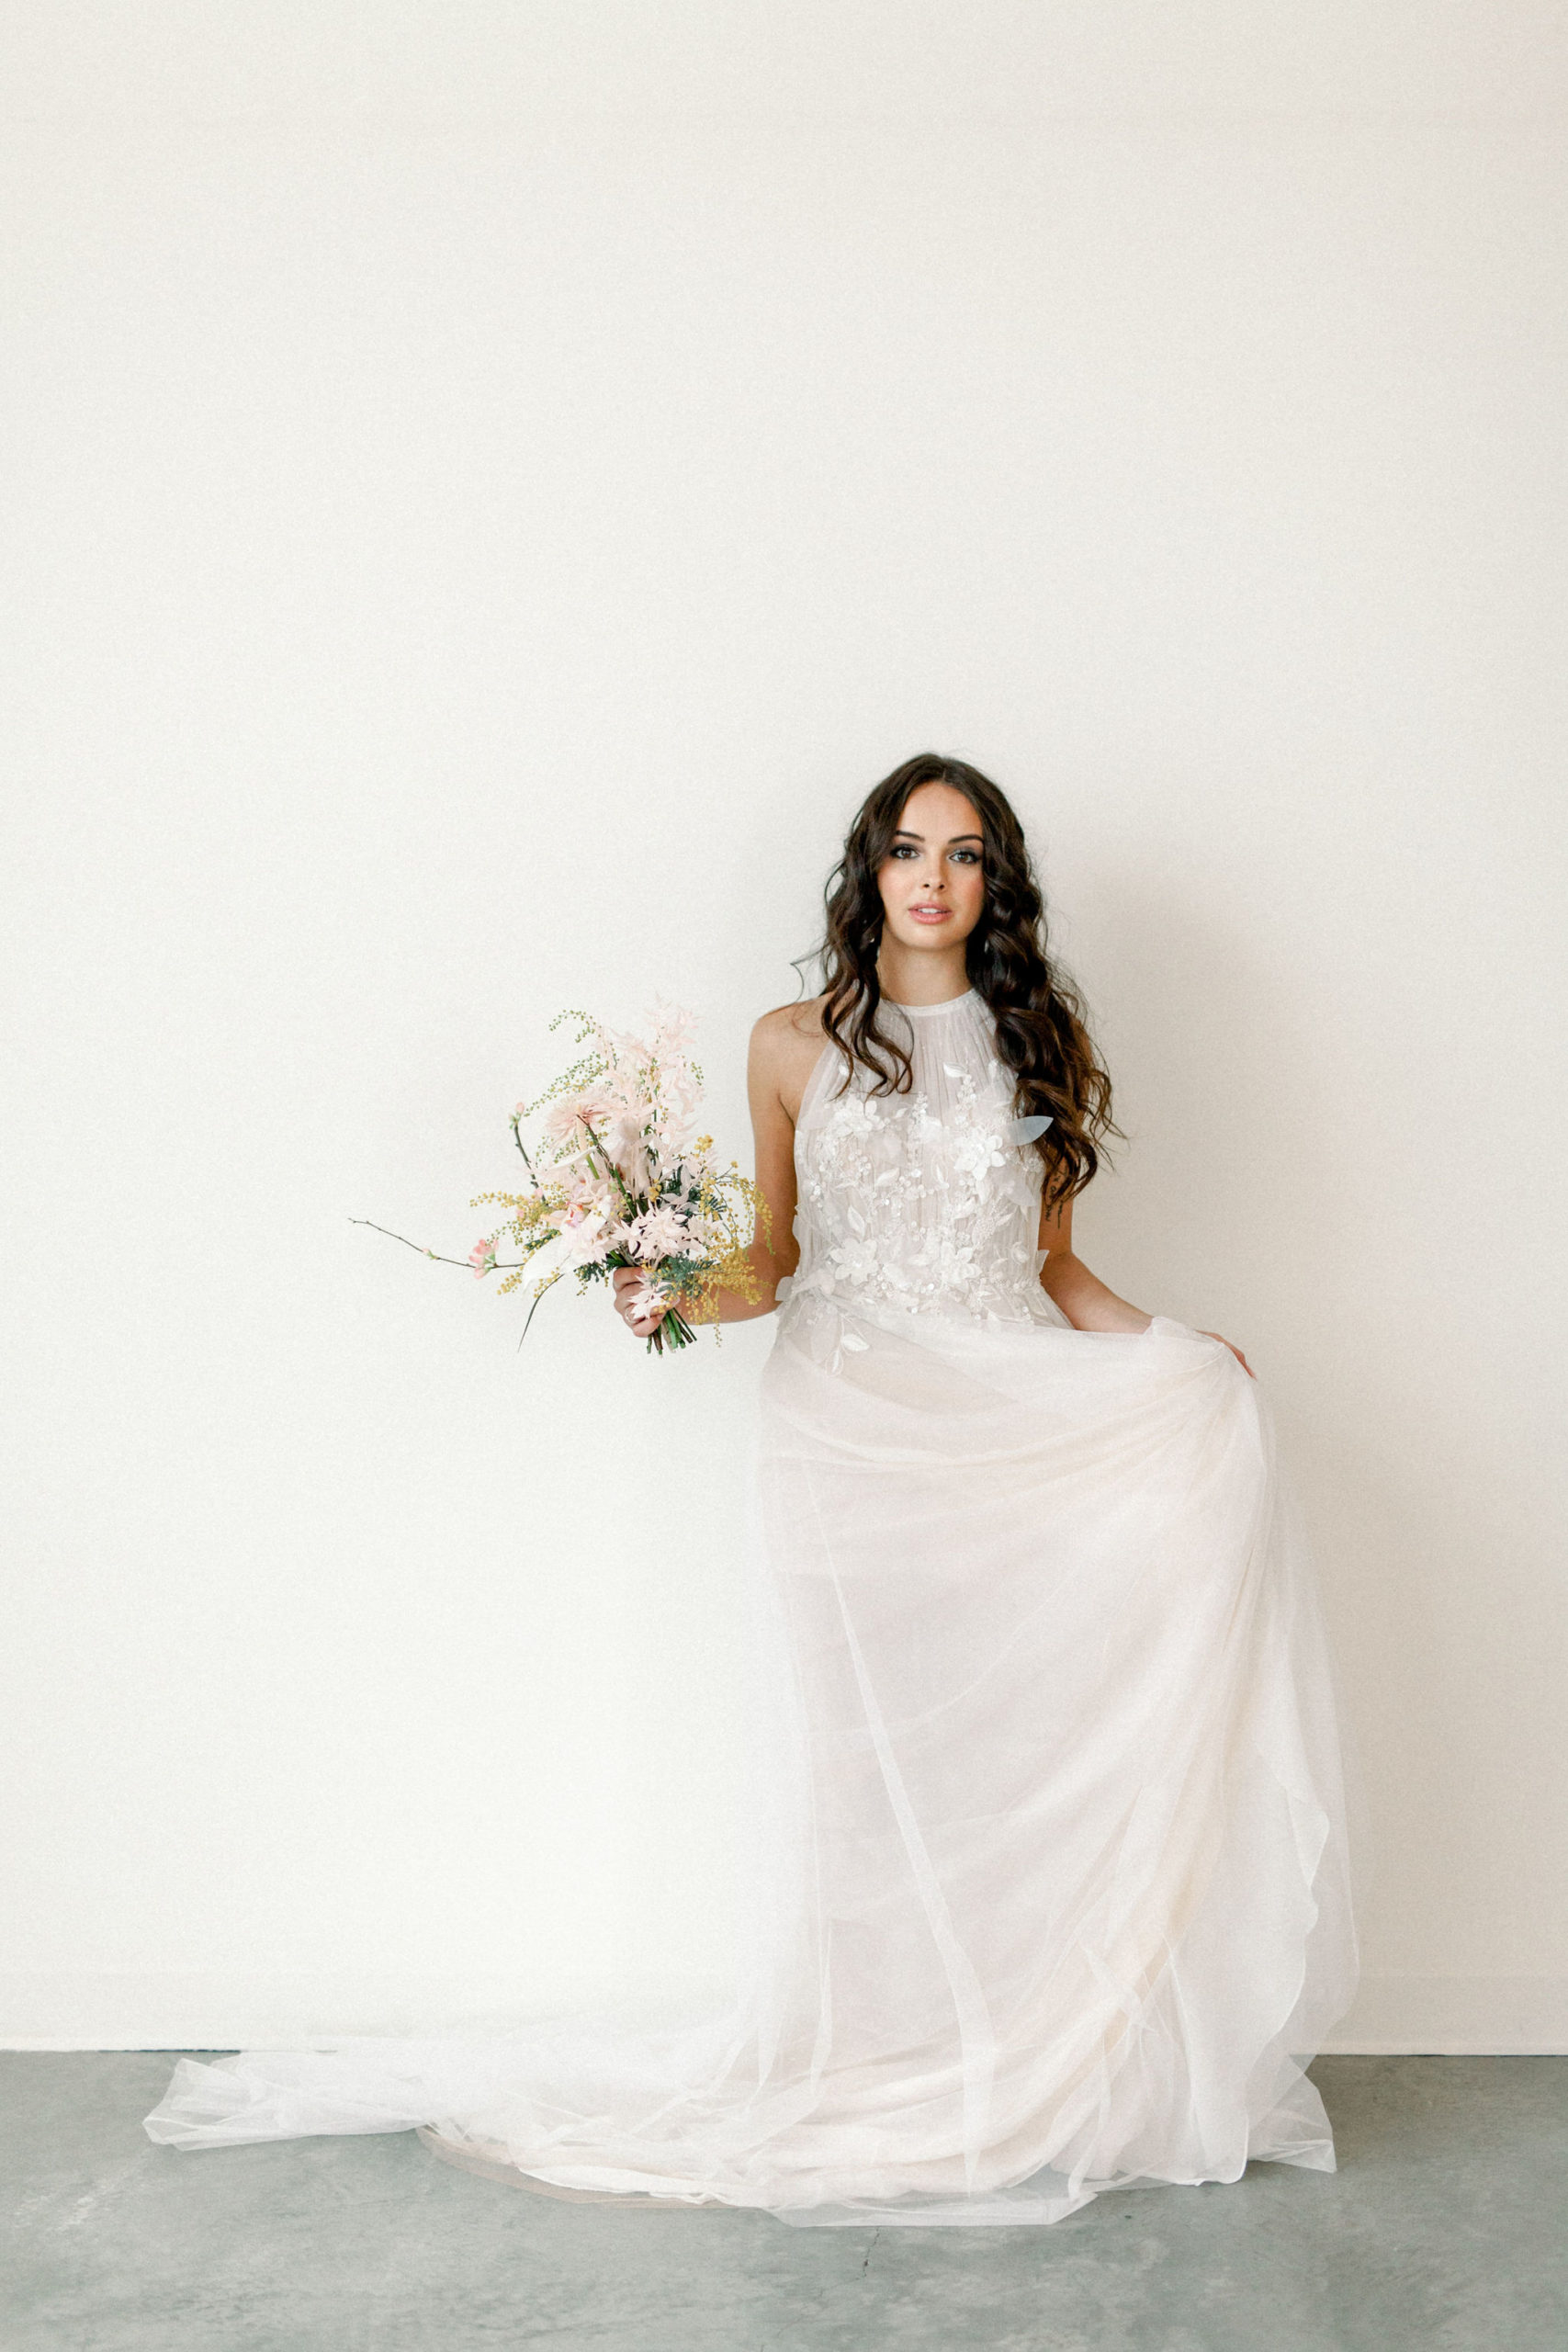 Best Tips for beautiful bridal portraits